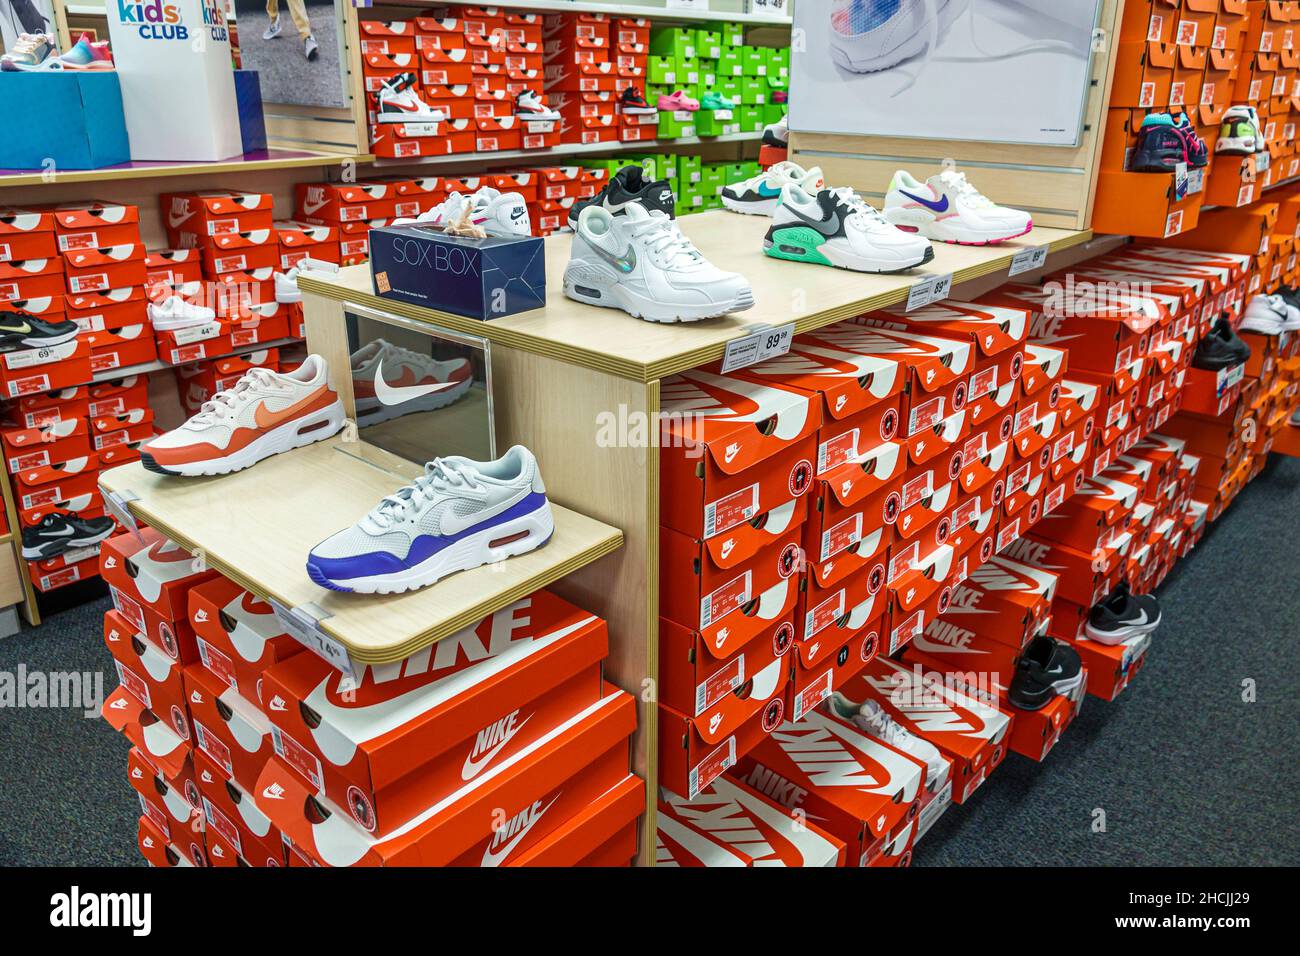 Nike Outlet Store High Resolution Stock Photography and Images - Alamy